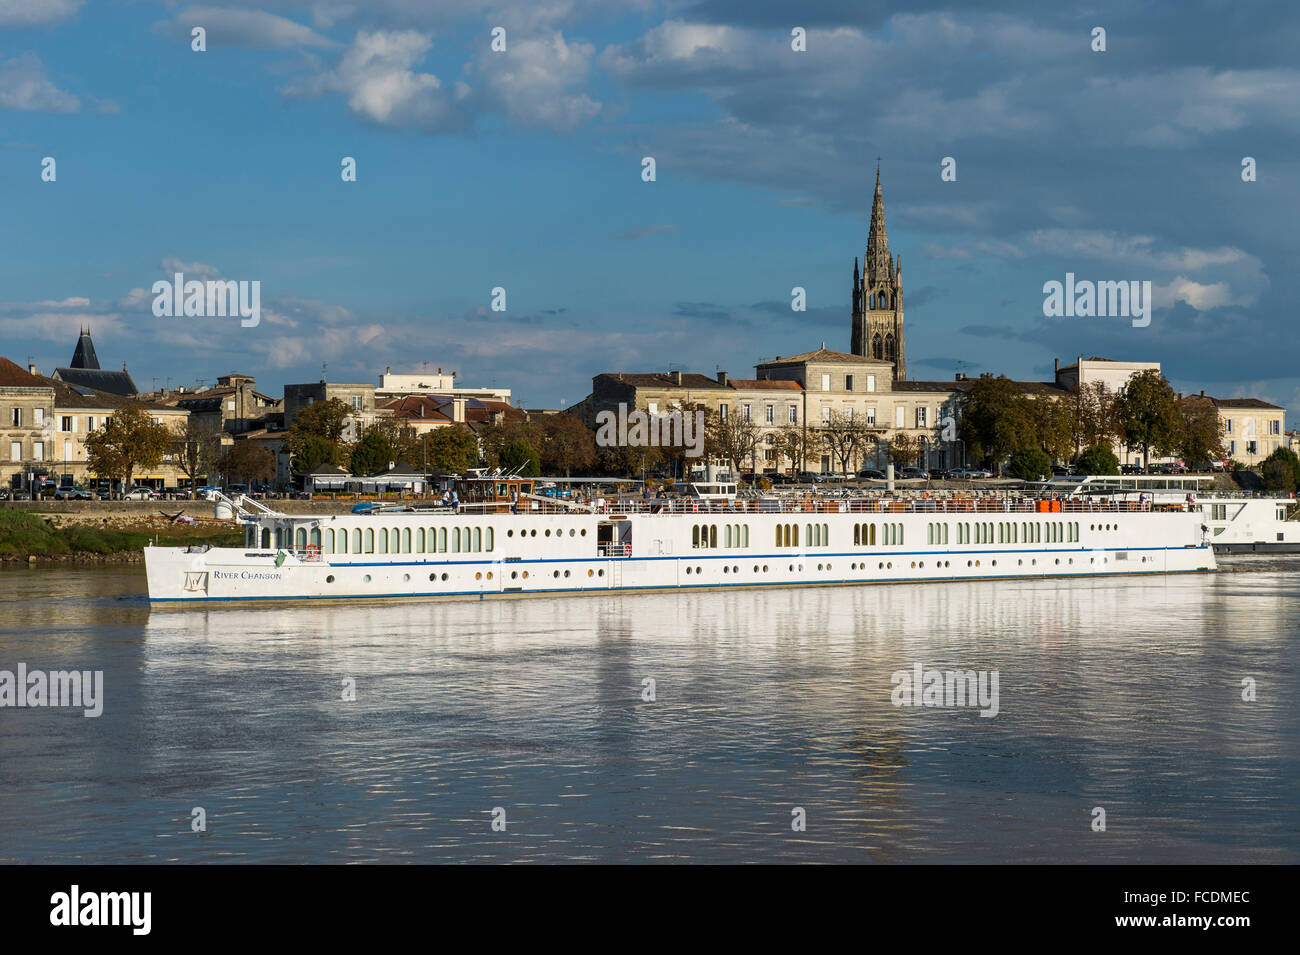 River cruise ship on the Dordogne river, Libourne, Département Gironde, France Stock Photo